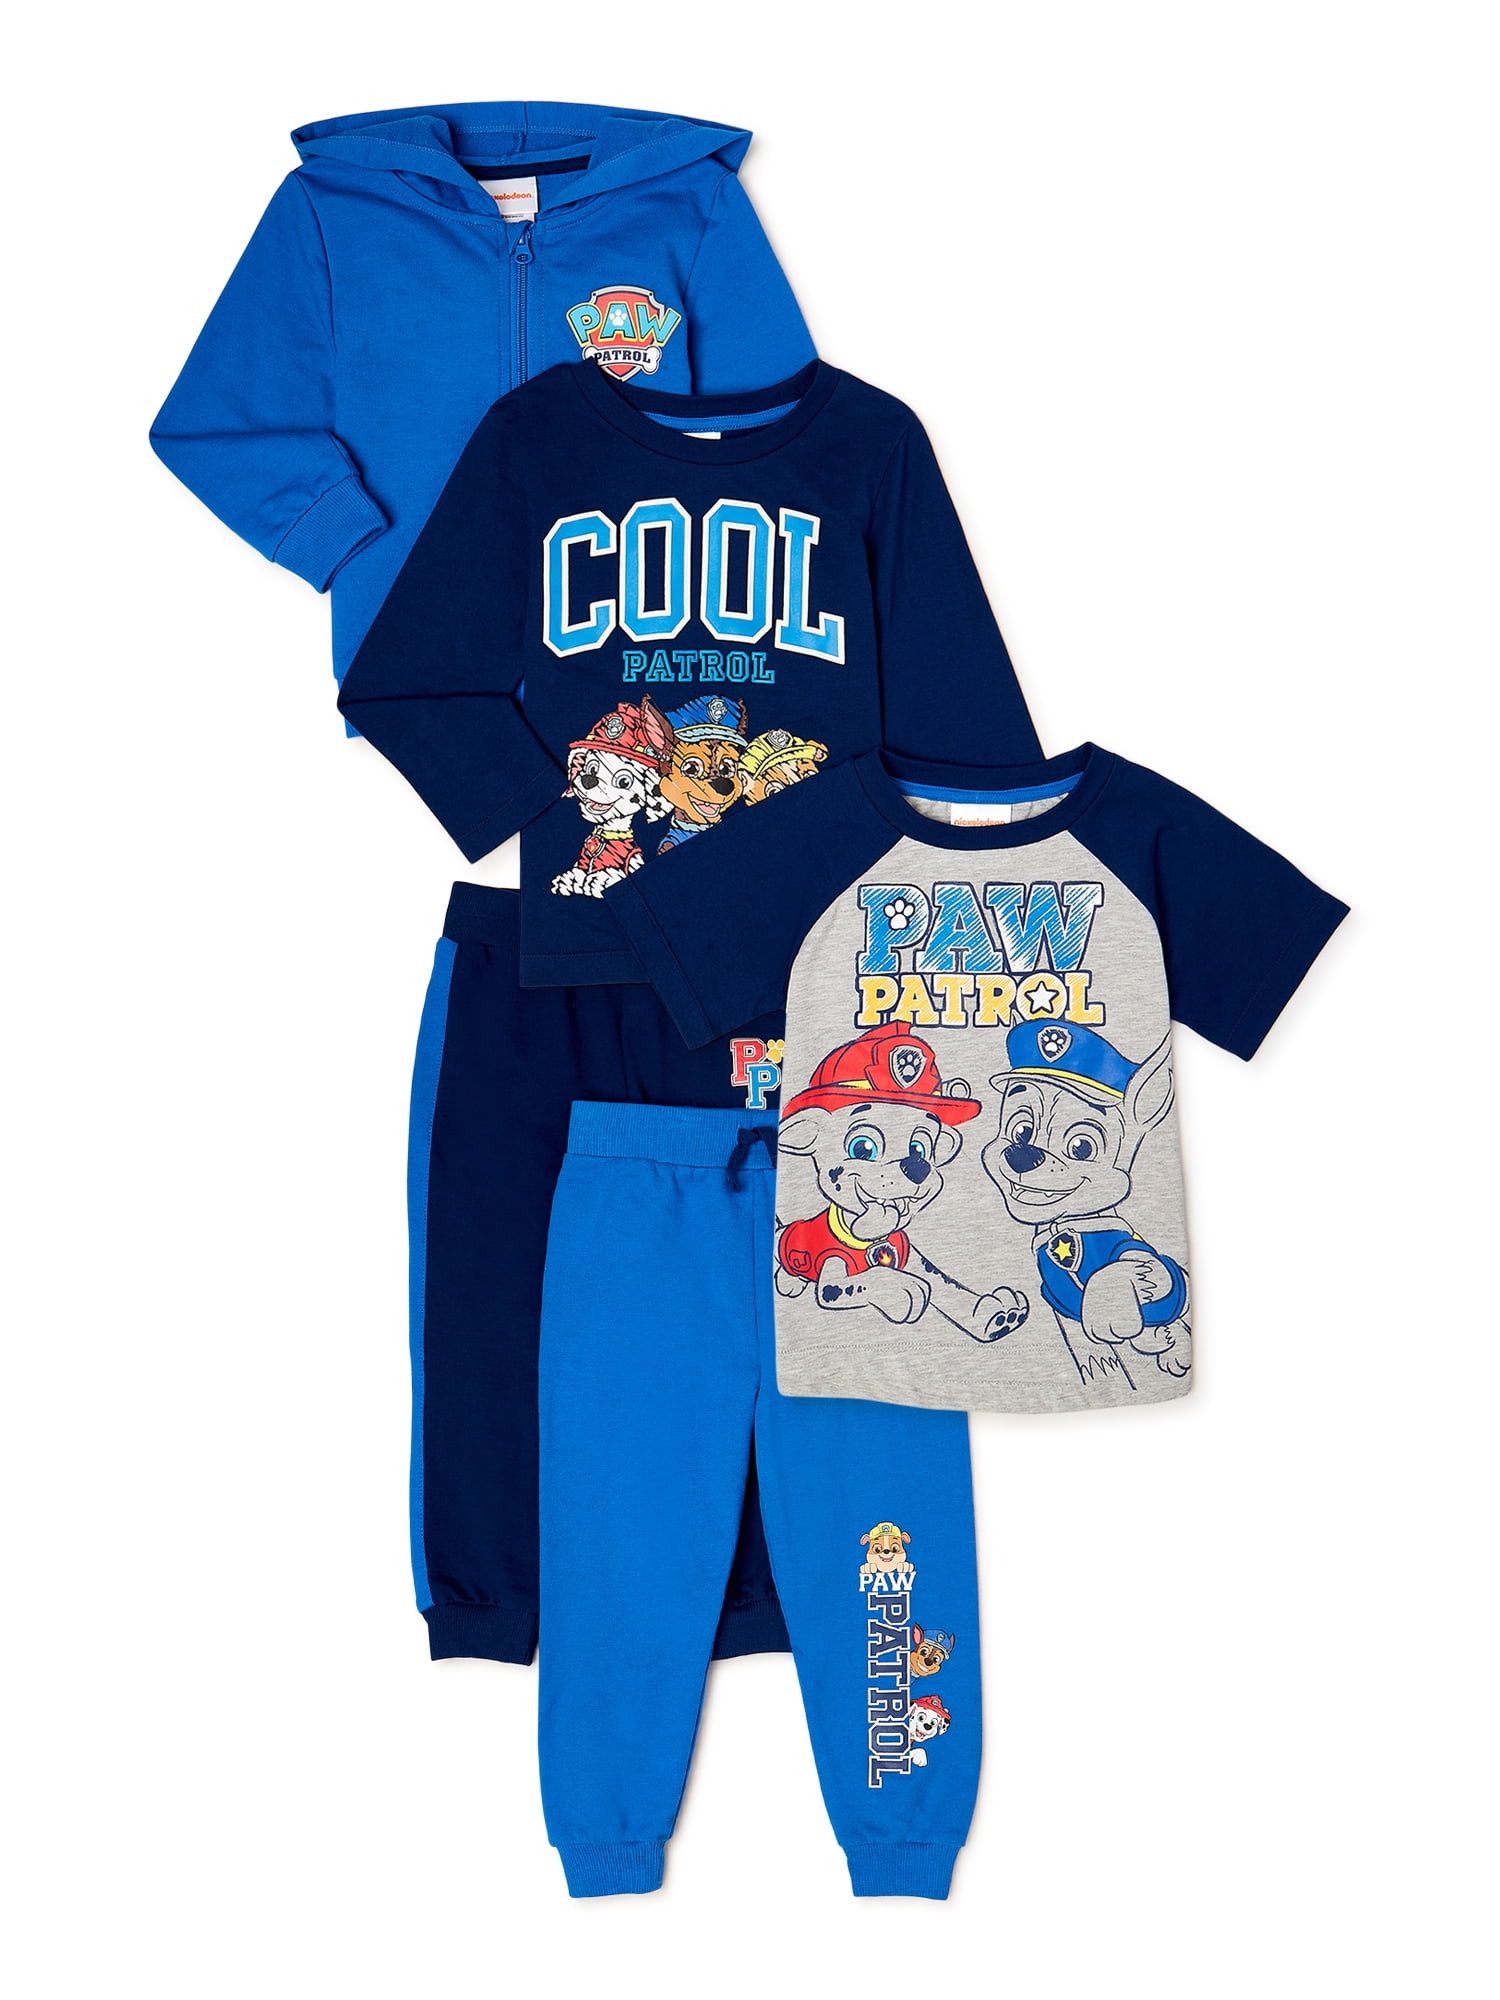 Go Jetters Boys Pants and Vest Underwear Set 18 Months 5 Years